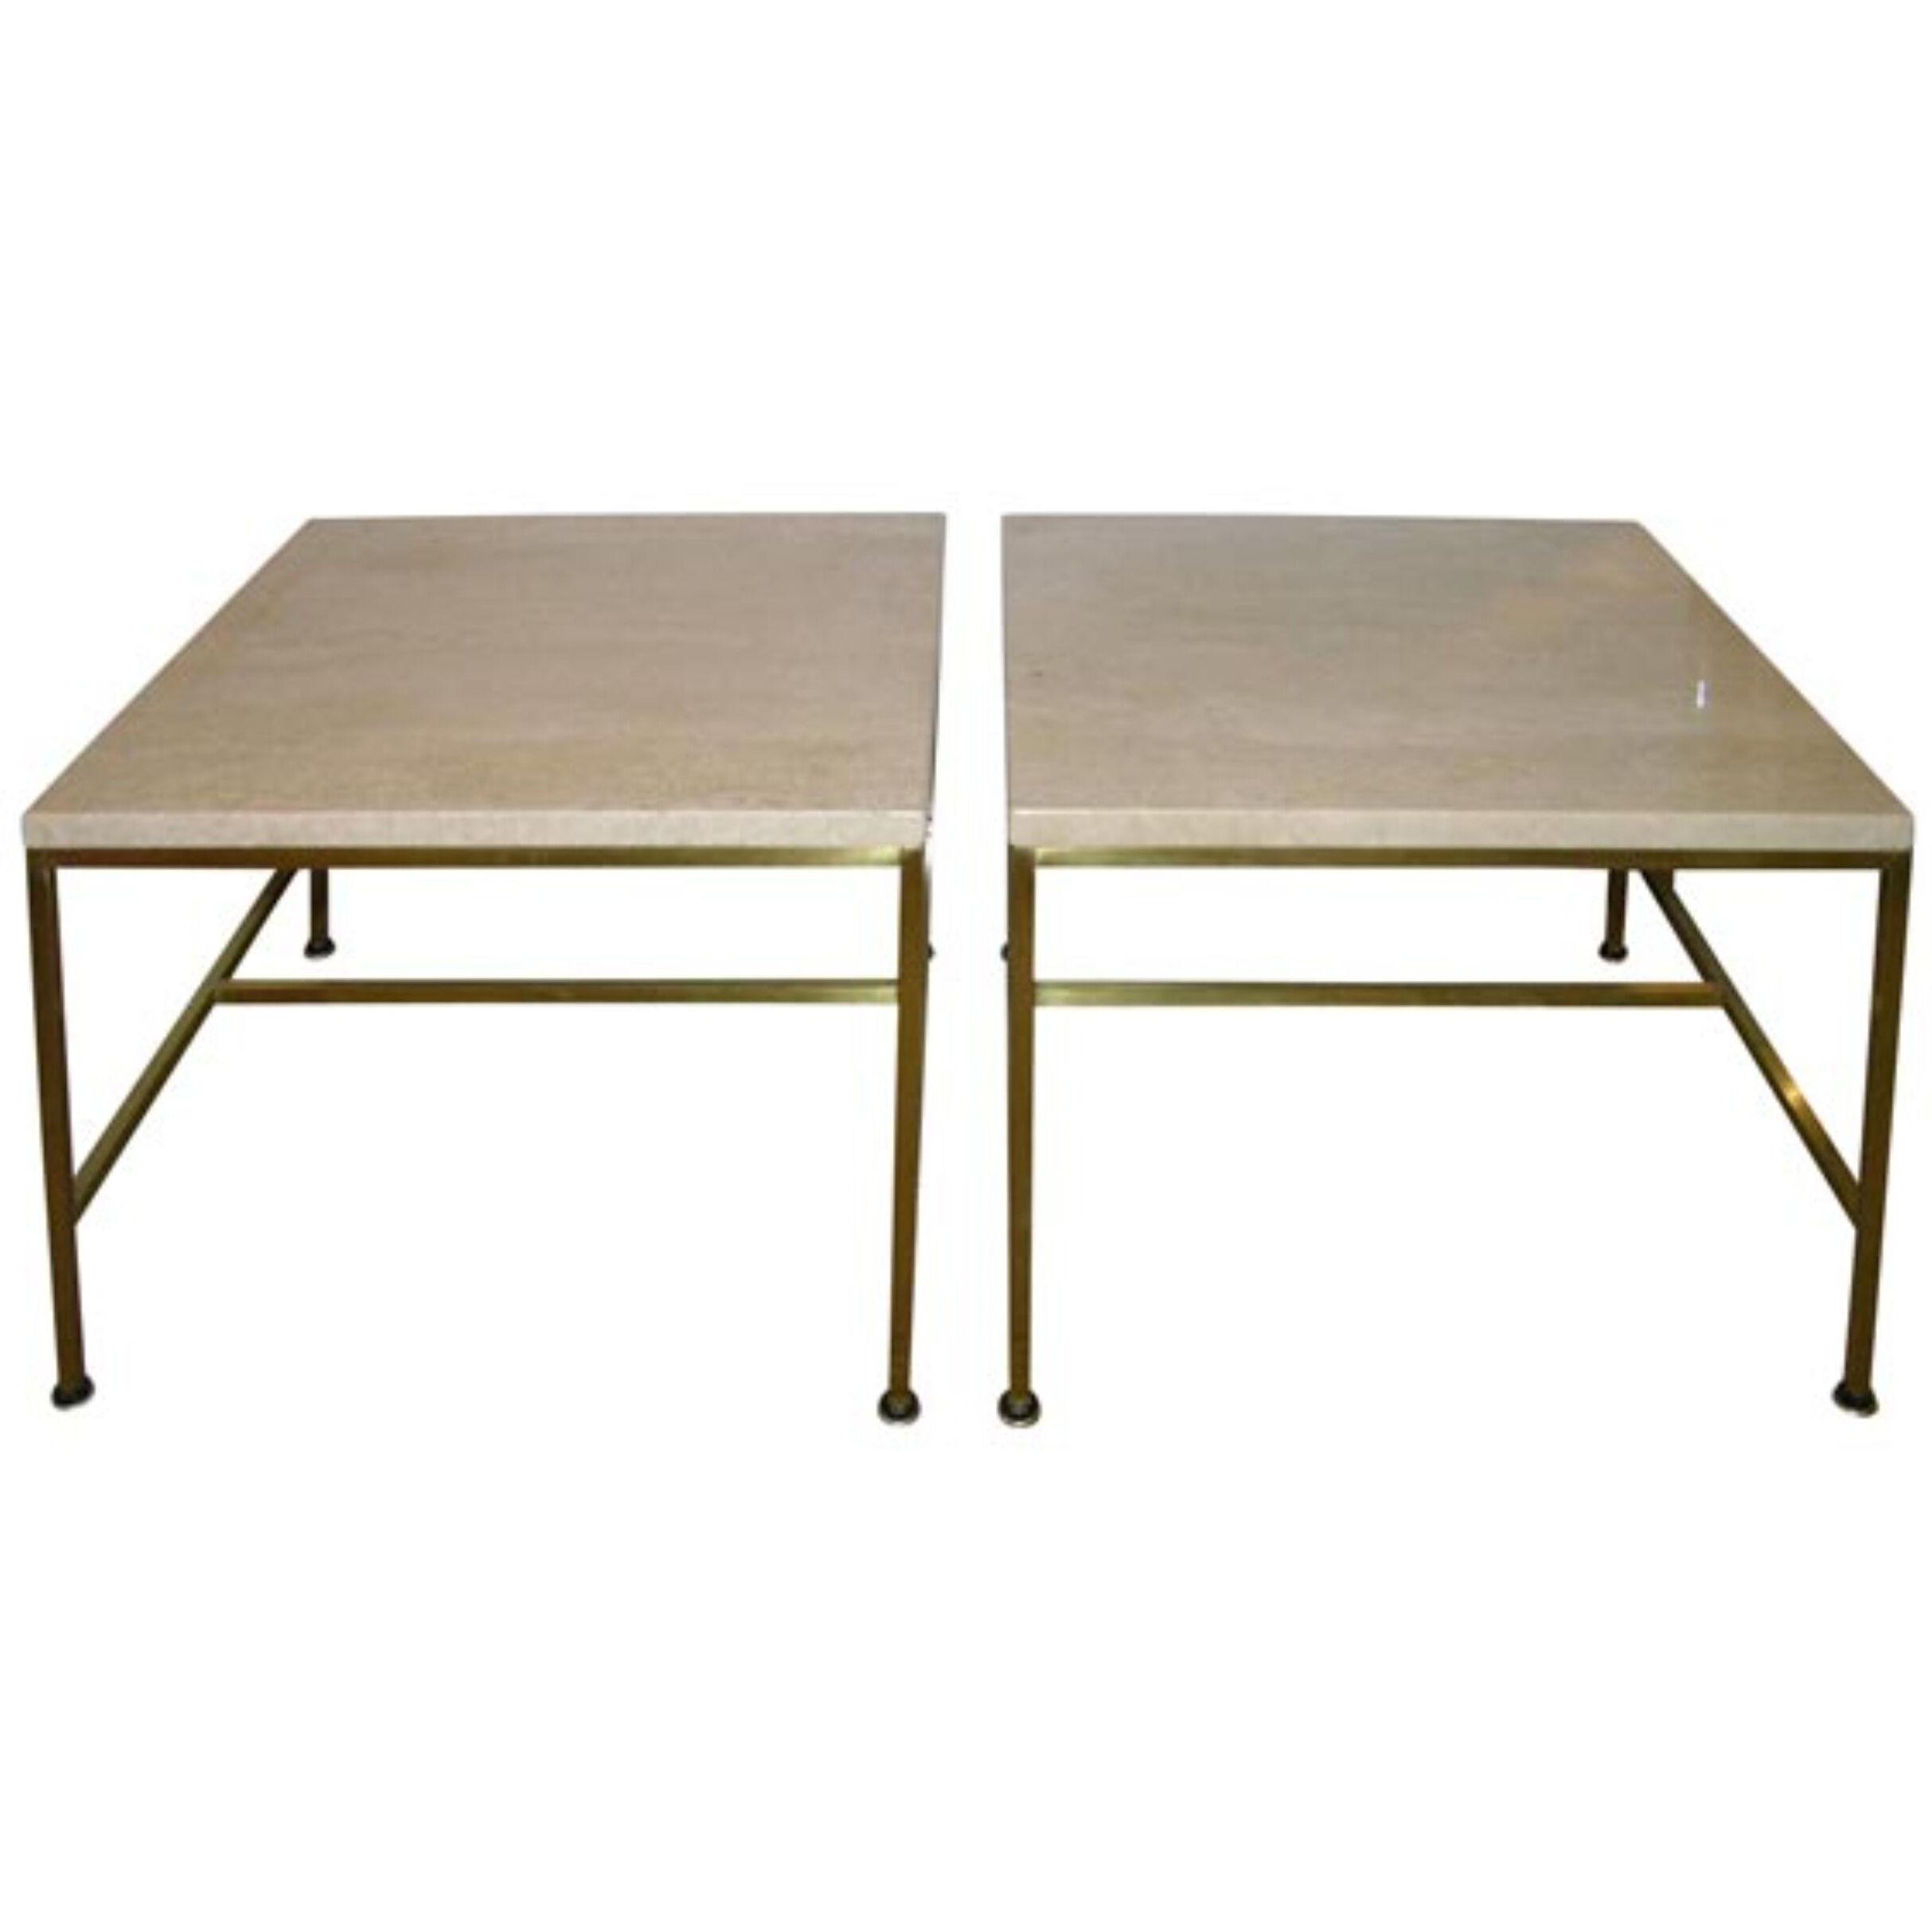 Pair of Occasional Tables by Paul McCobb for Directional	